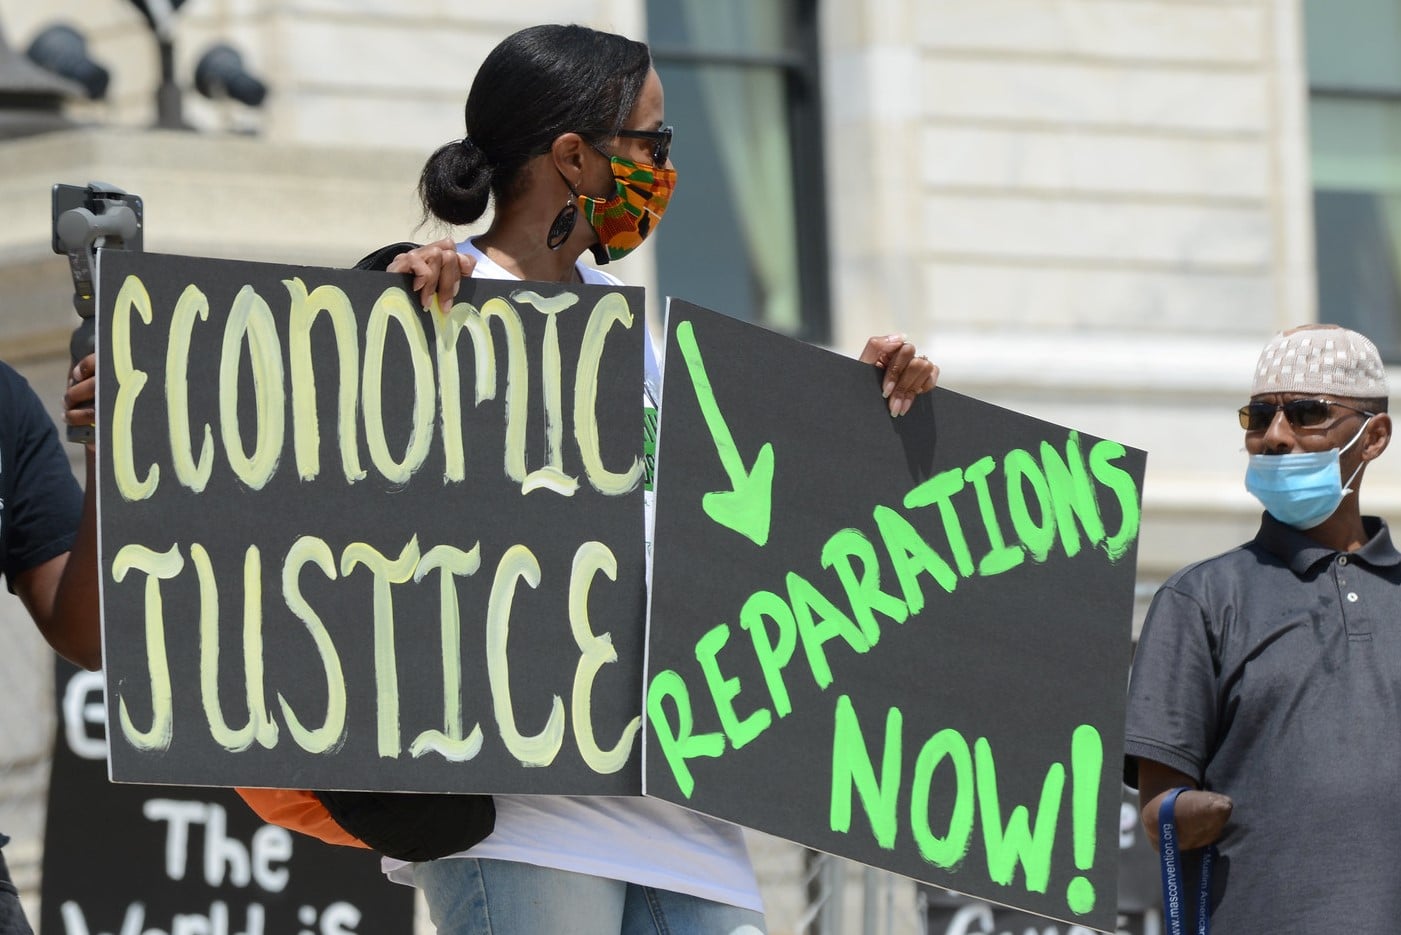 protester holding up signs reading "Economic Justice" and "Reparations Now!"